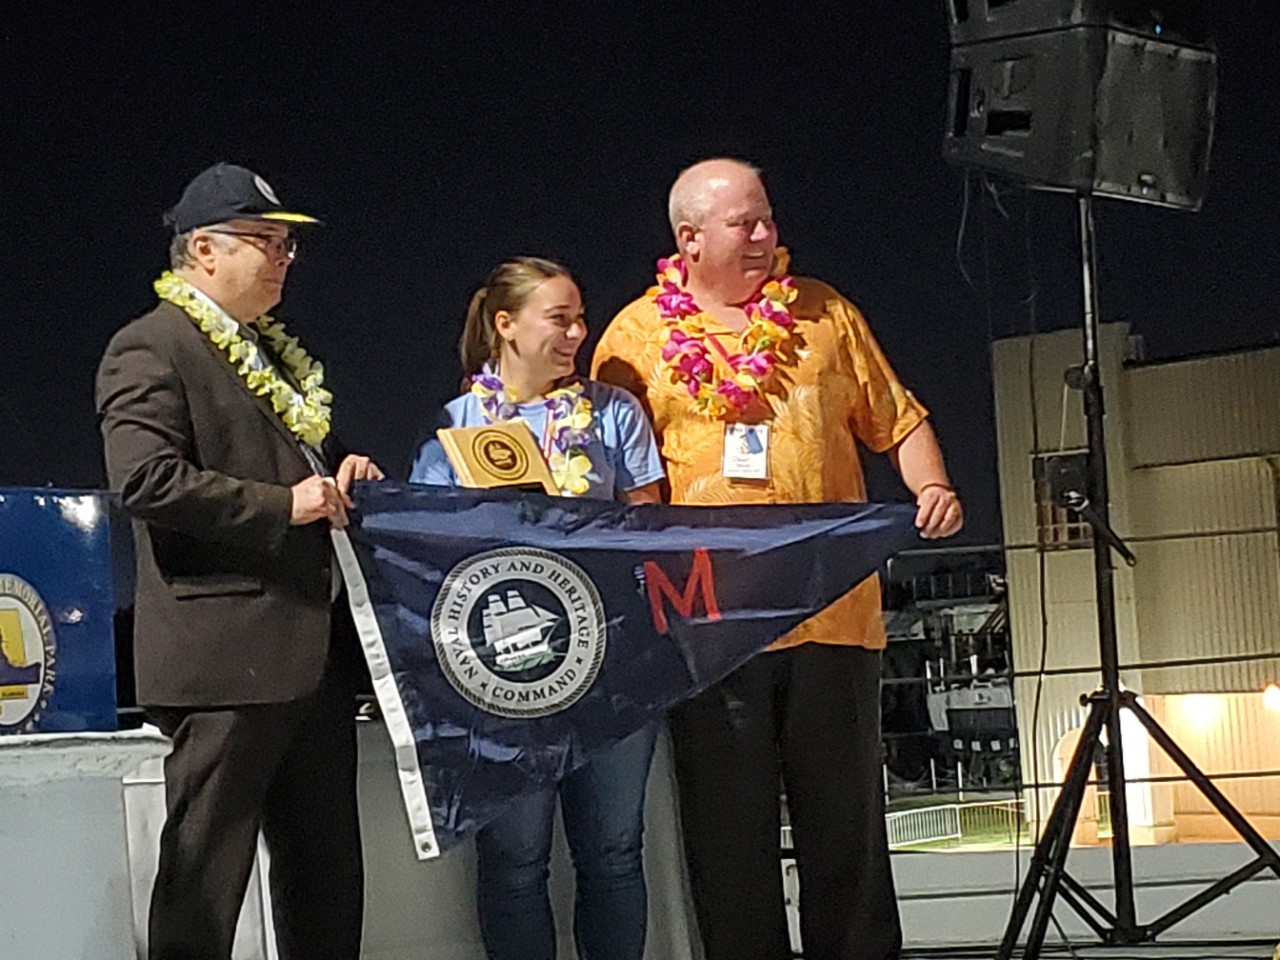 MOBILE, Ala. (Sept. 25, 2021) Naval History and Heritage Command (NHHC) Director Samuel J. Cox, left, and NHHC Navy Museums Division Director Dave Adams present the “Maintenance Excellence Award” to Shanna Schuster, a representative for Destroyer...